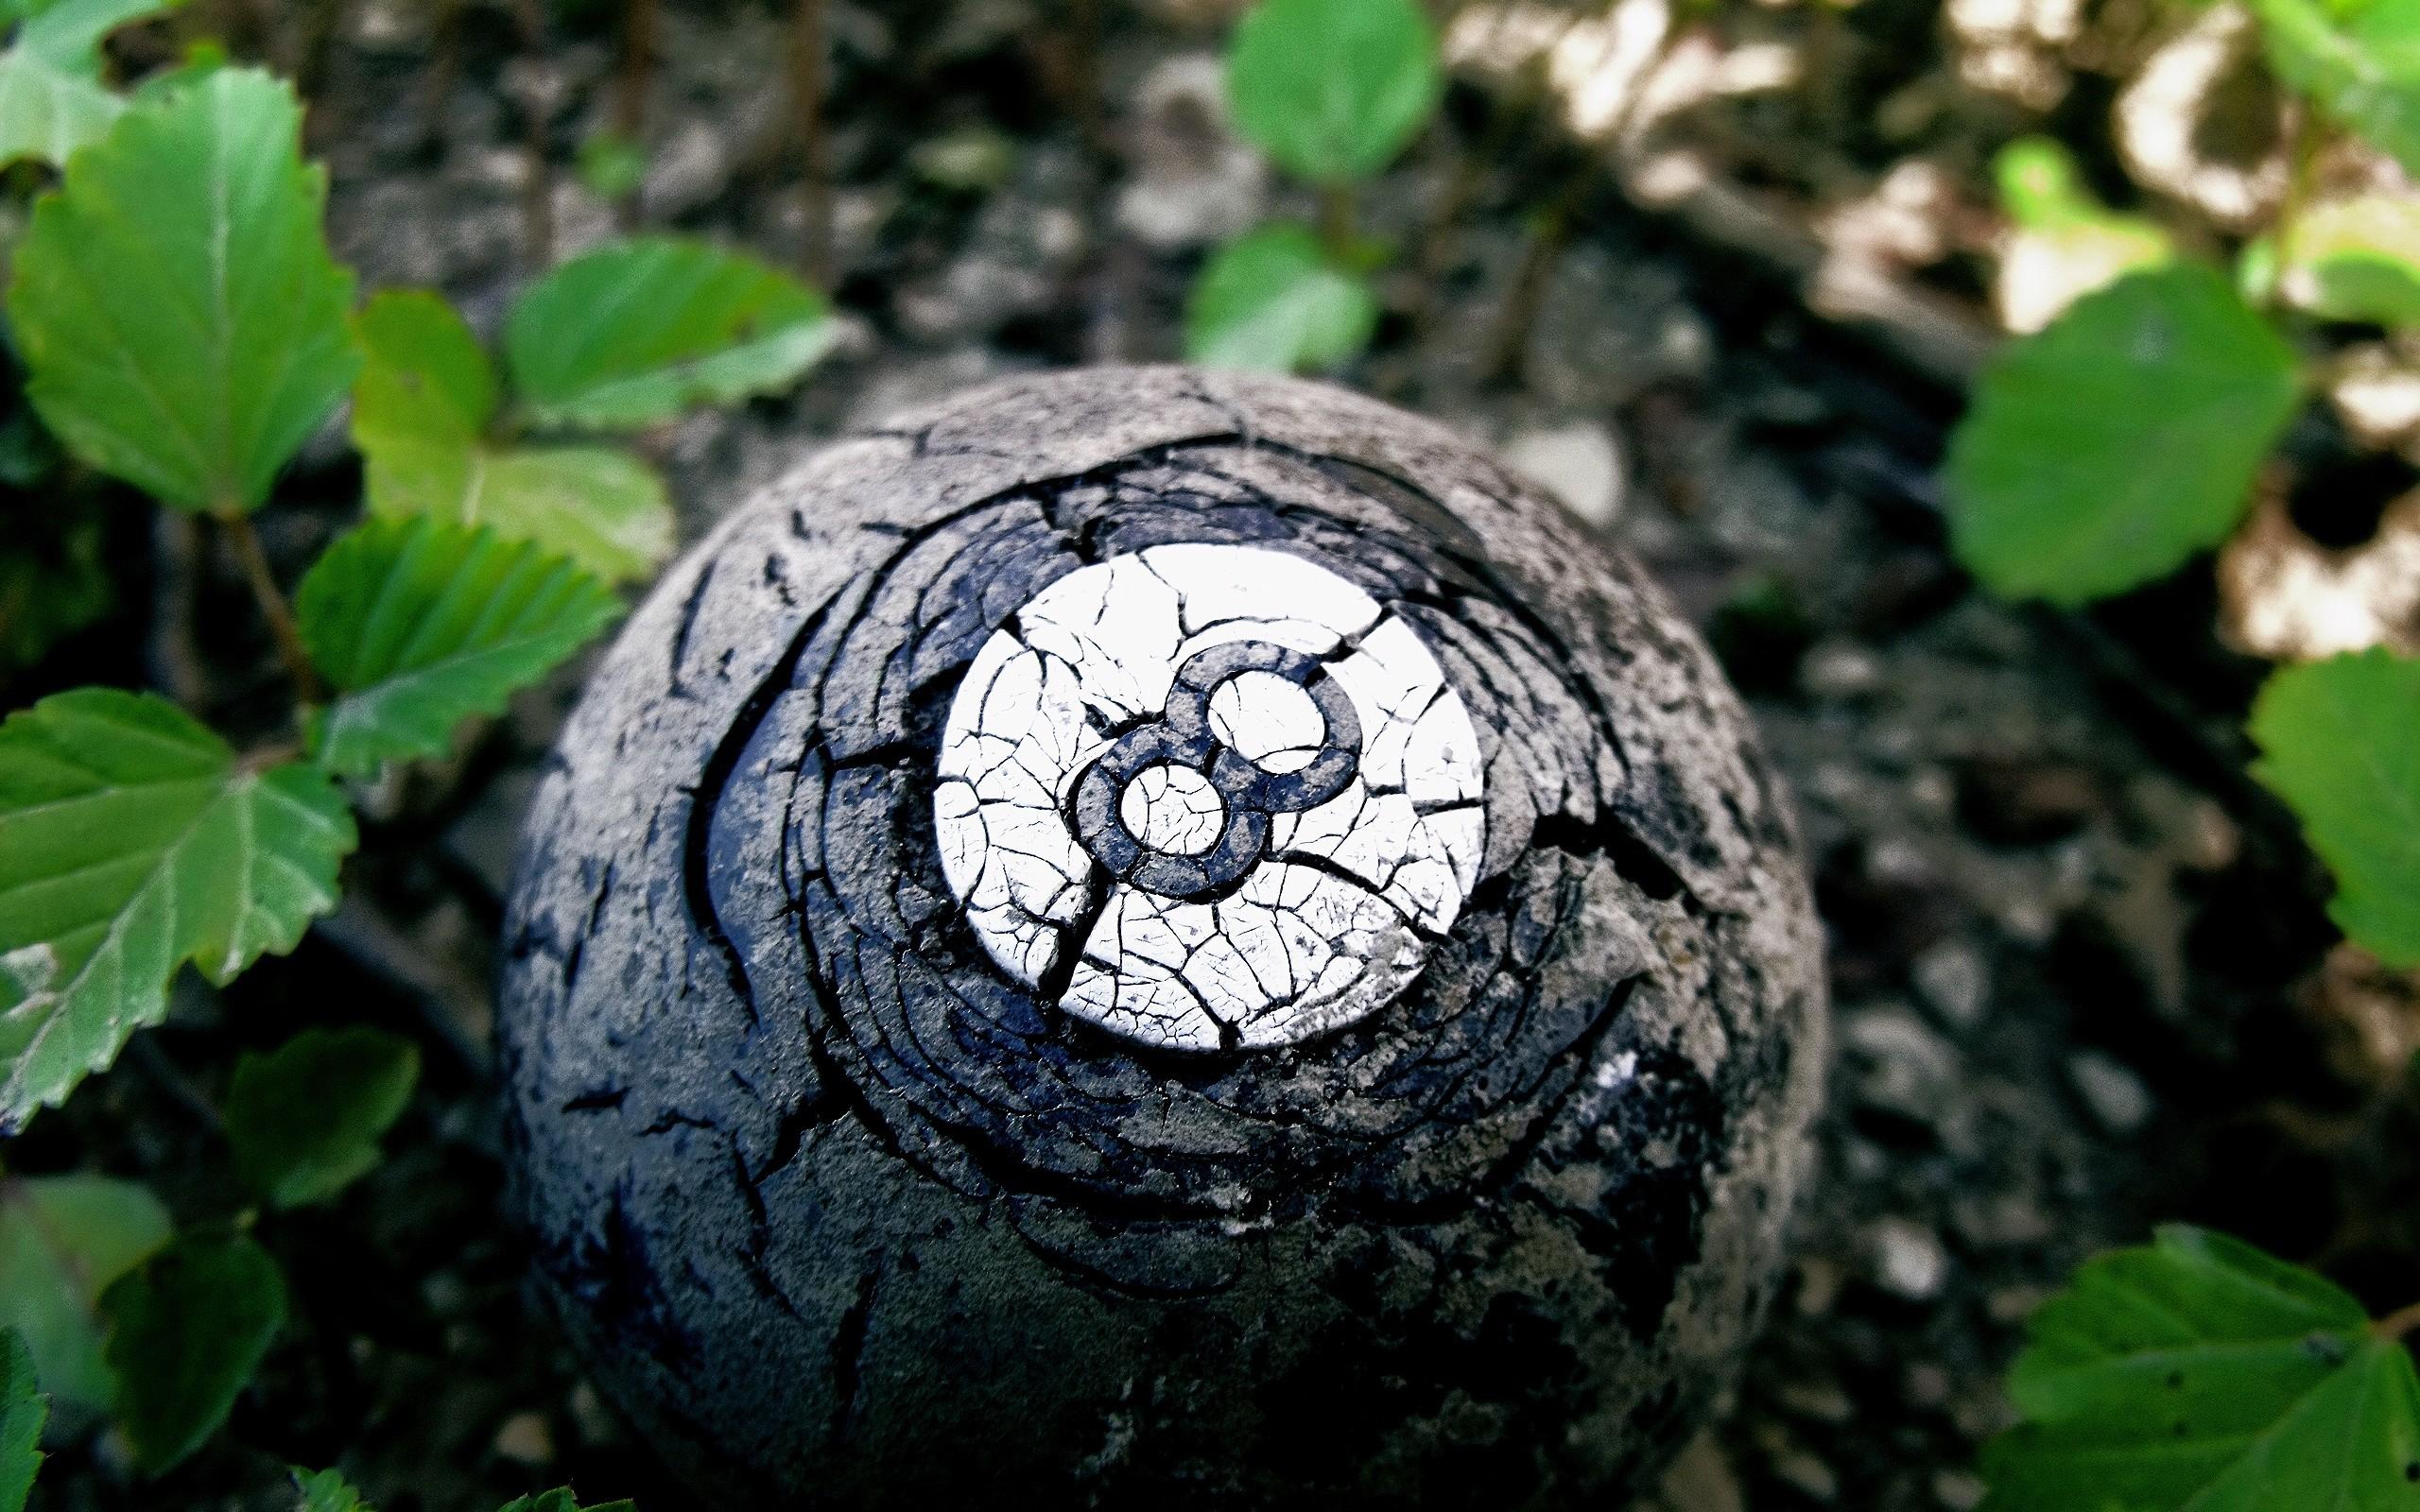 HD wallpaper, Numbers, Leaves, Cracked, Closeup, Decay, Old, Plants, 8 Ball, Macro